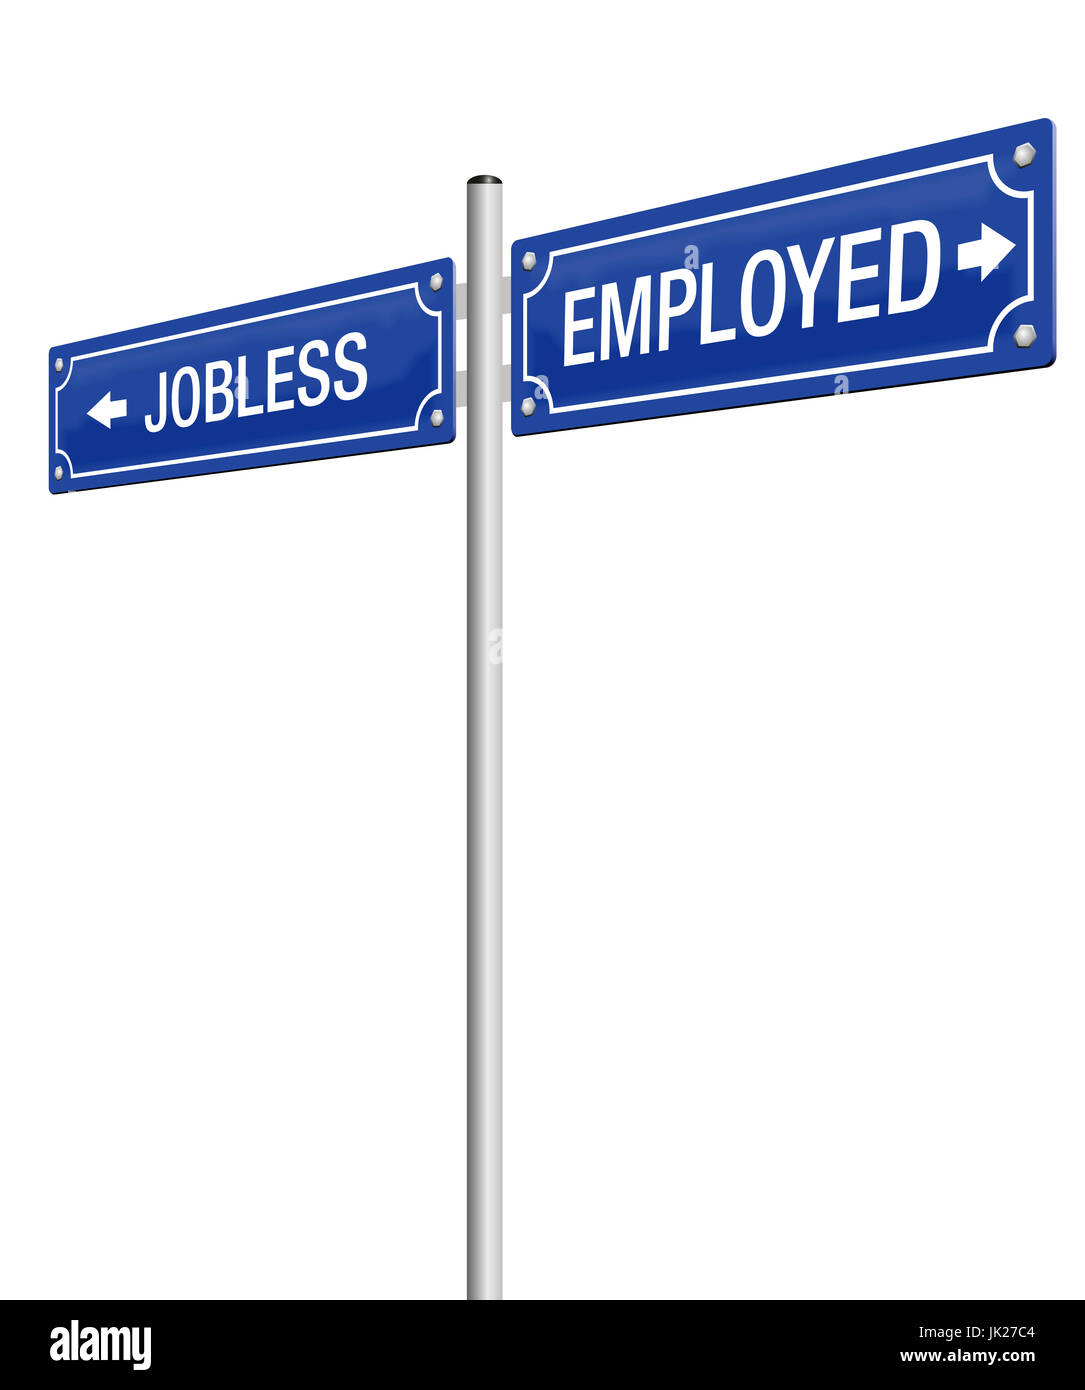 JOBLESS and EMPLOYED written on a blue guidepost. Stock Photo